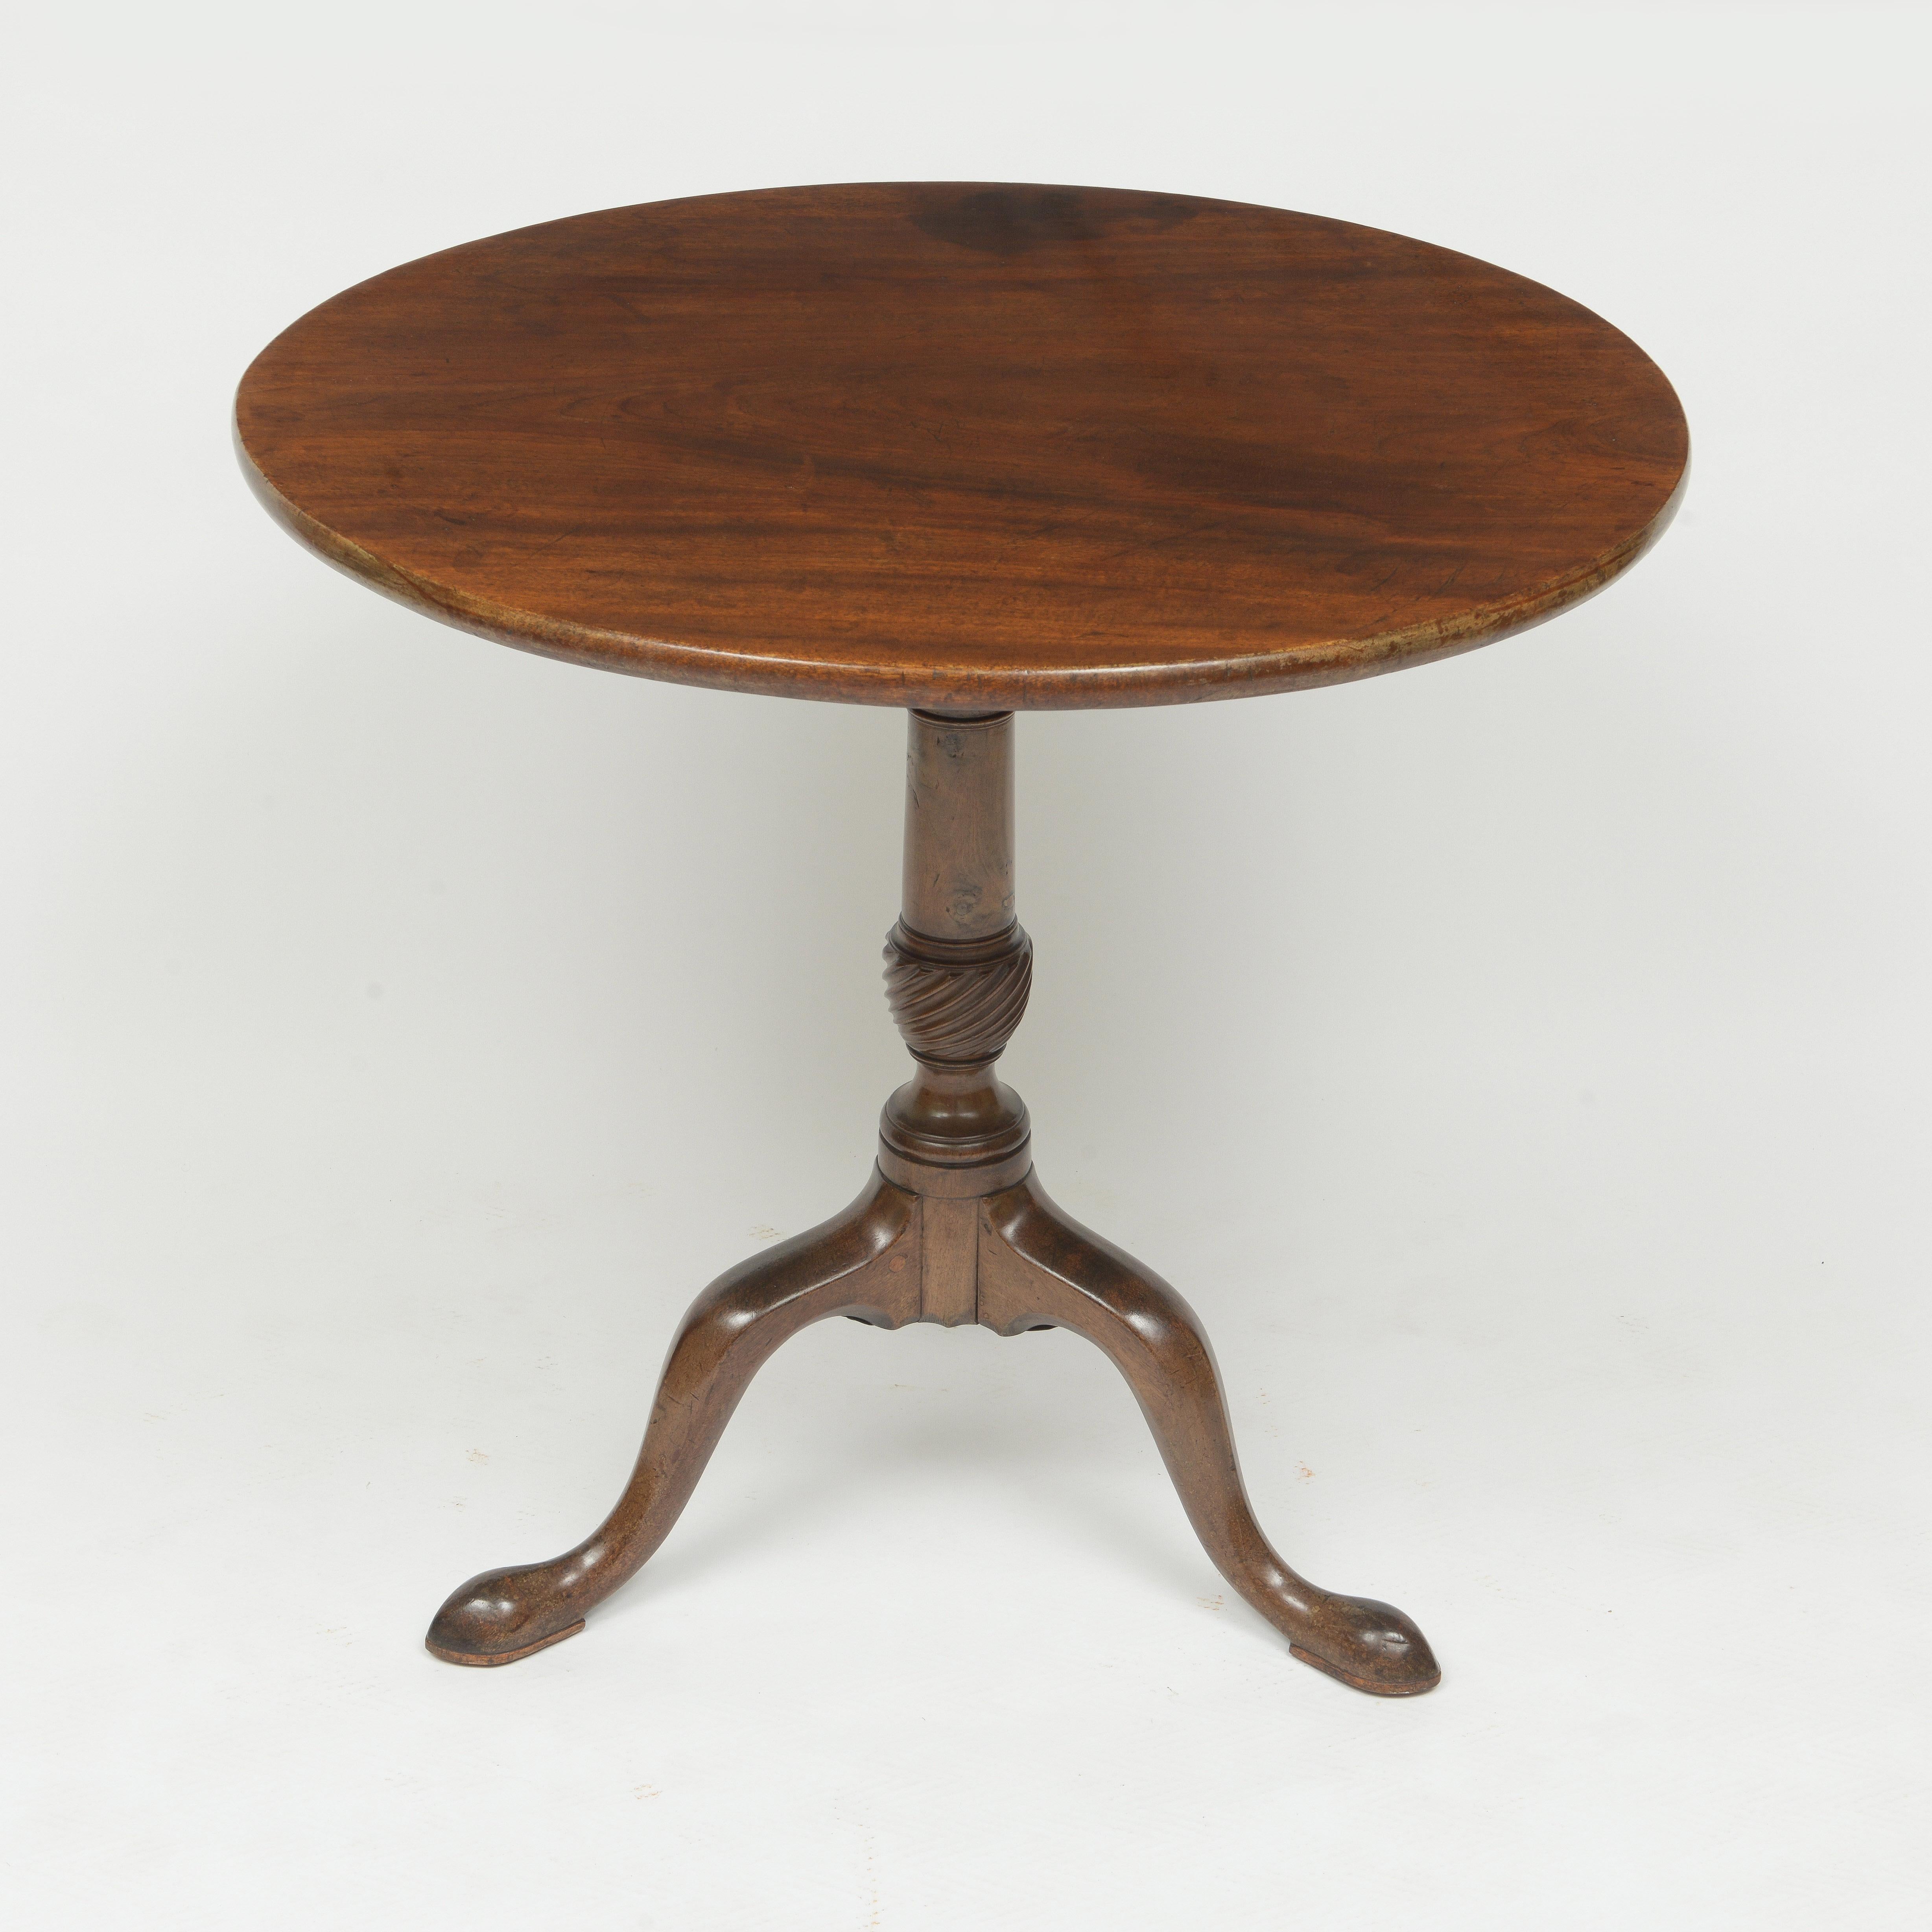 British Round Top Tripod Table in Walnut Finished With Shellac and Wax Finish For Sale